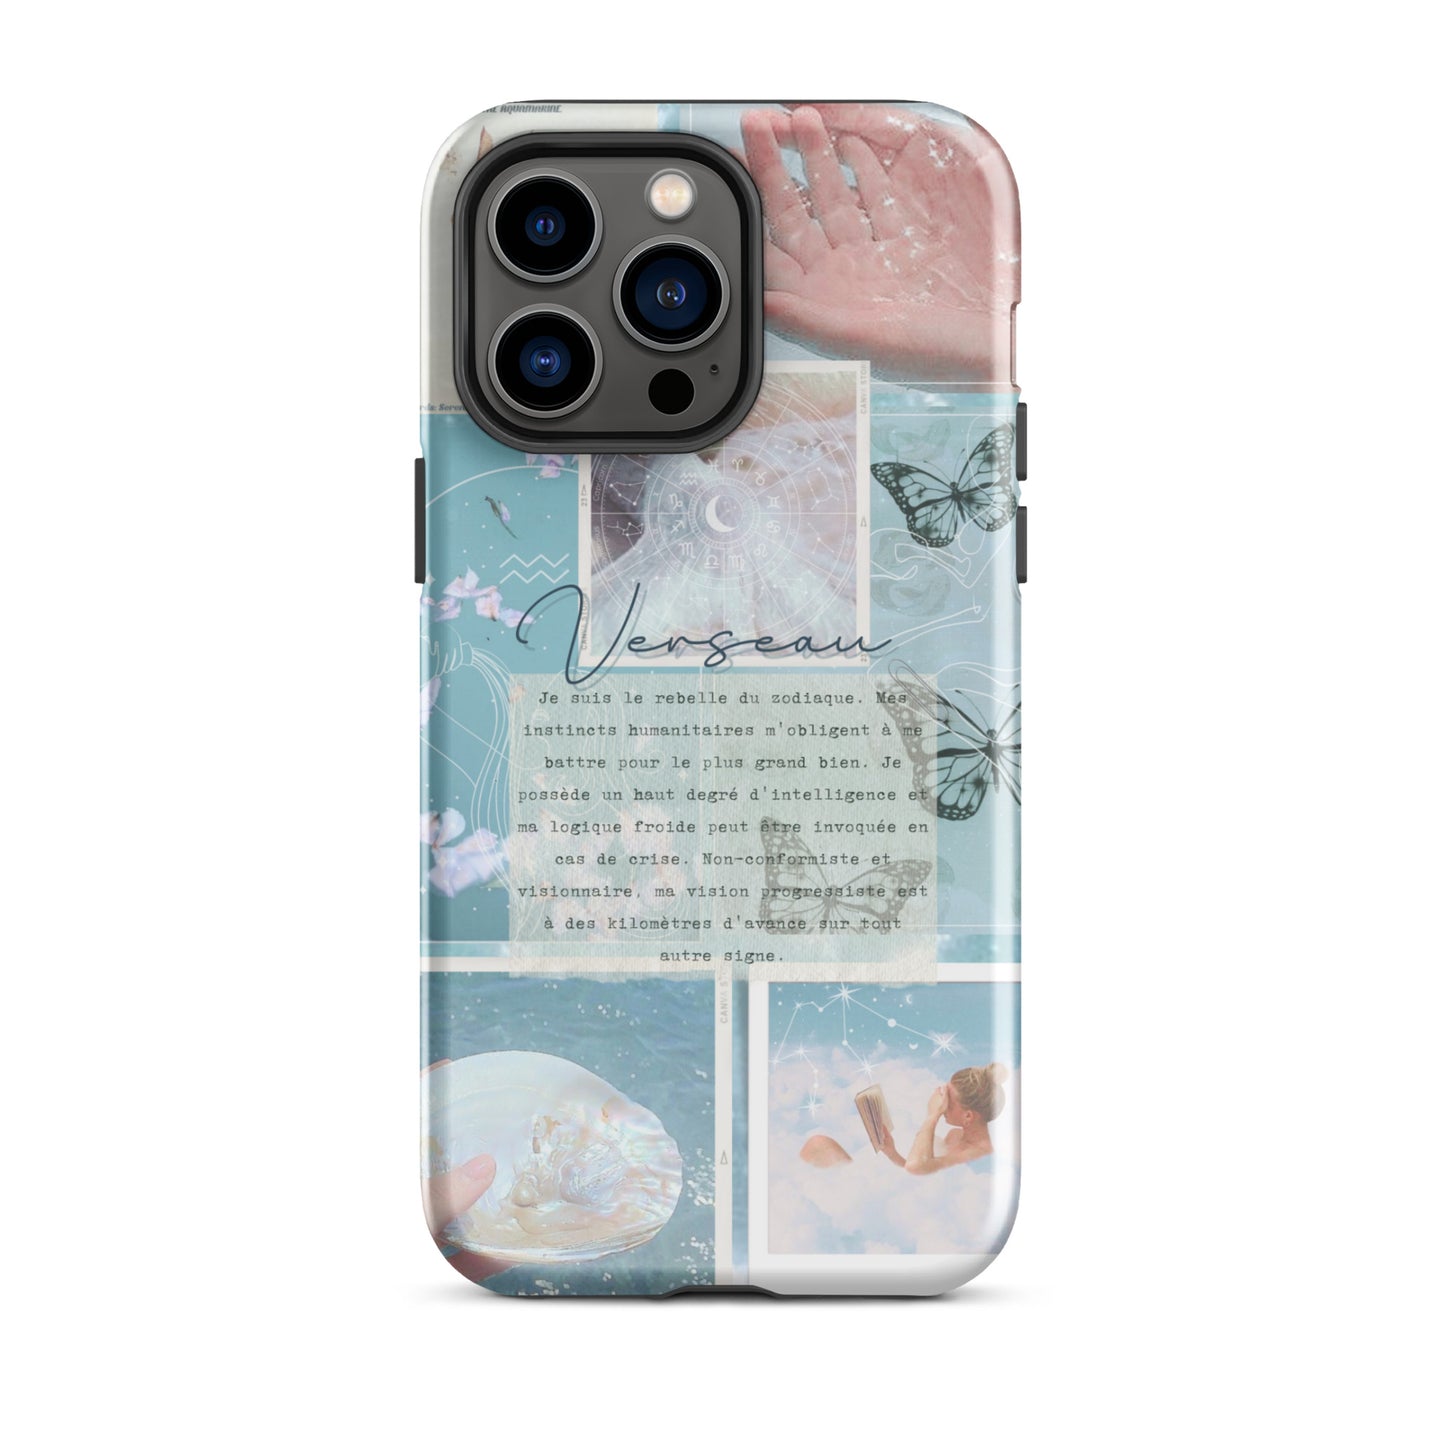 Verseau Aesthetic Case for iPhone® (VF)